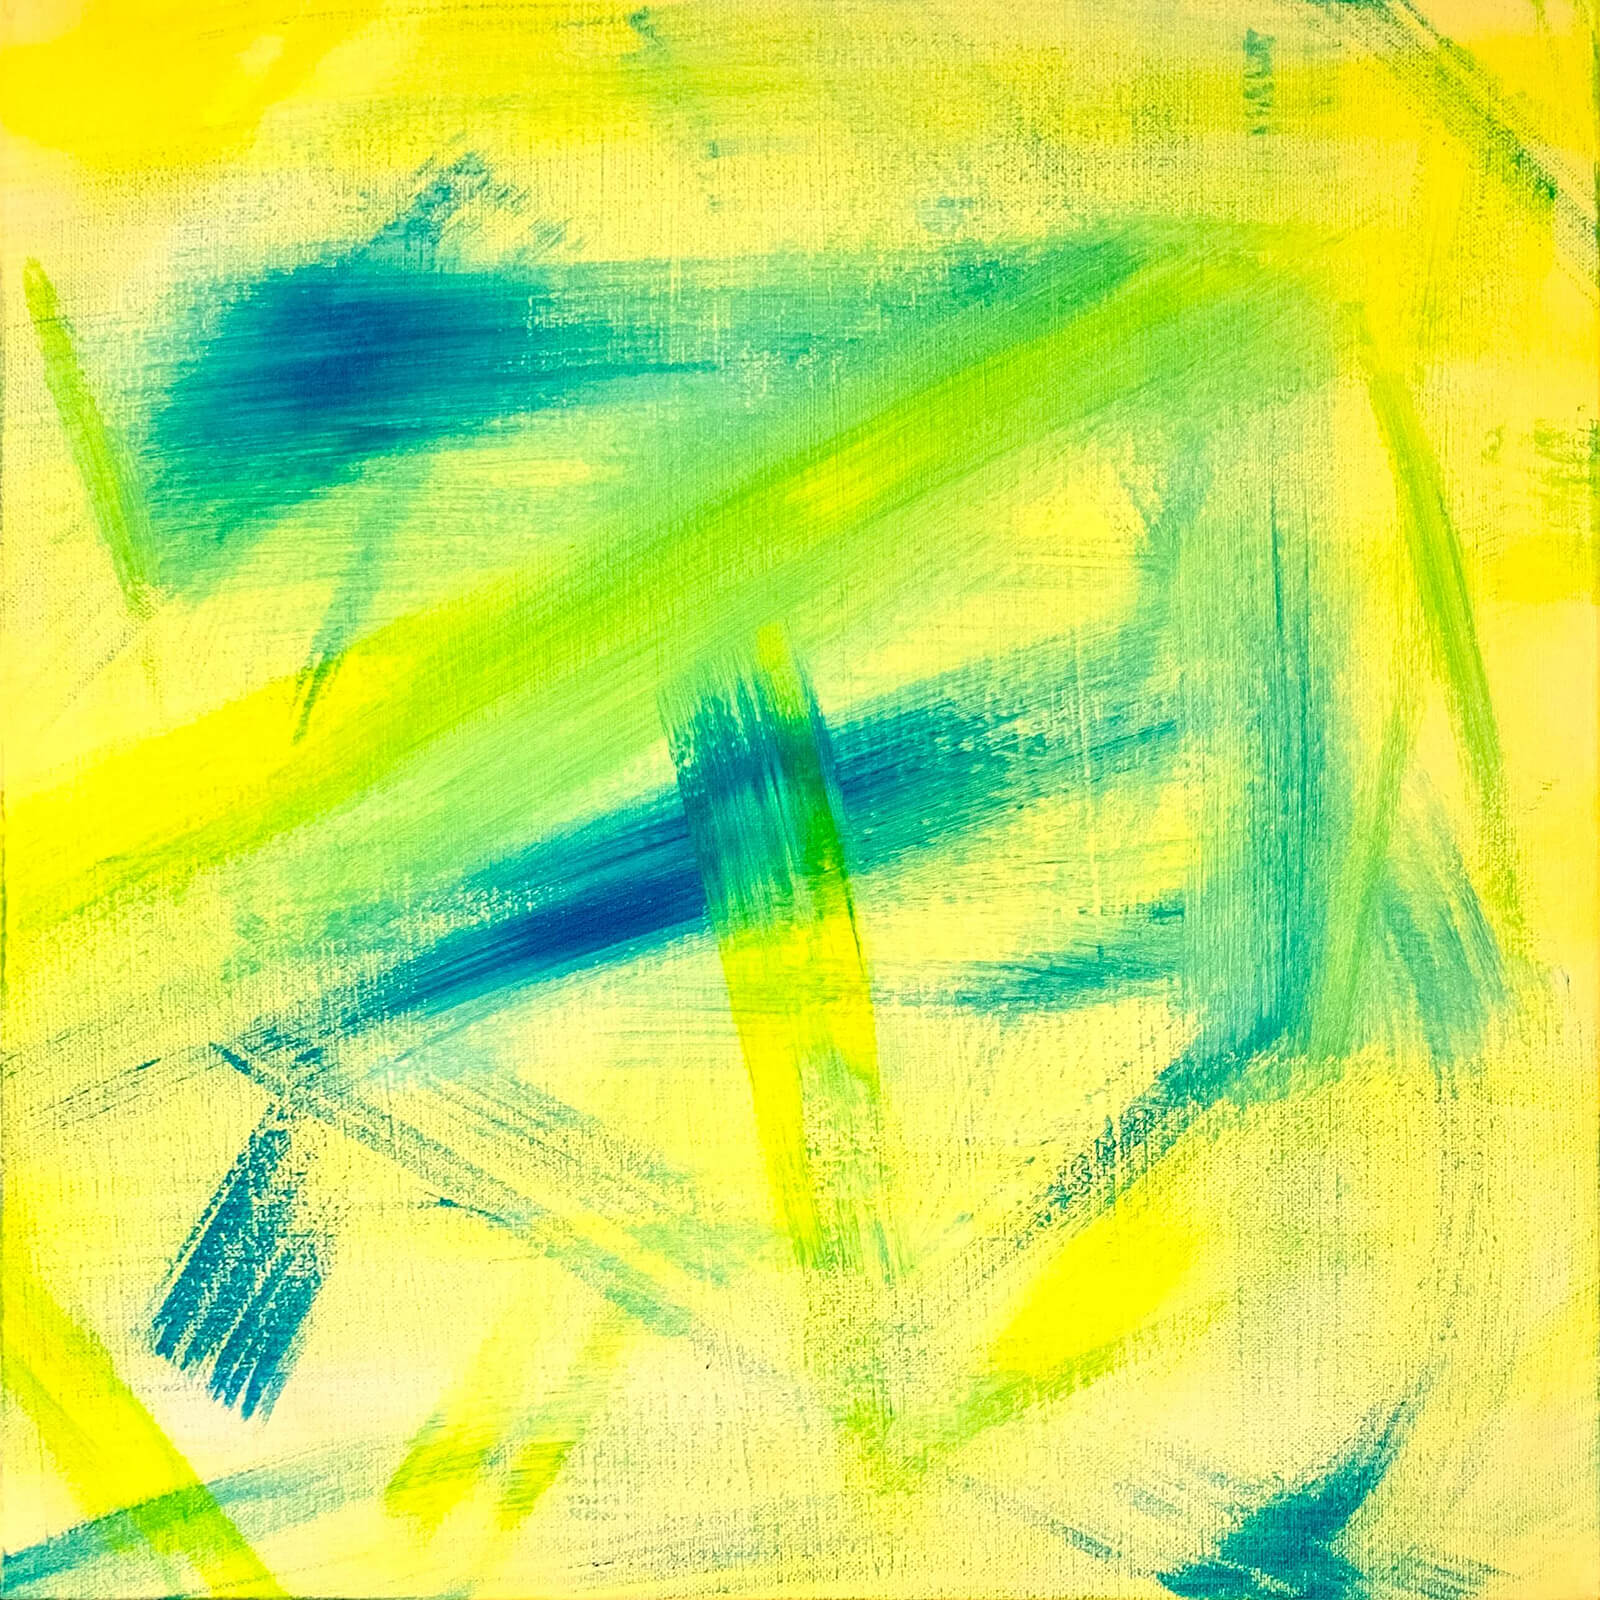 A bright yellow canvas, with neon green and blue markings on top.